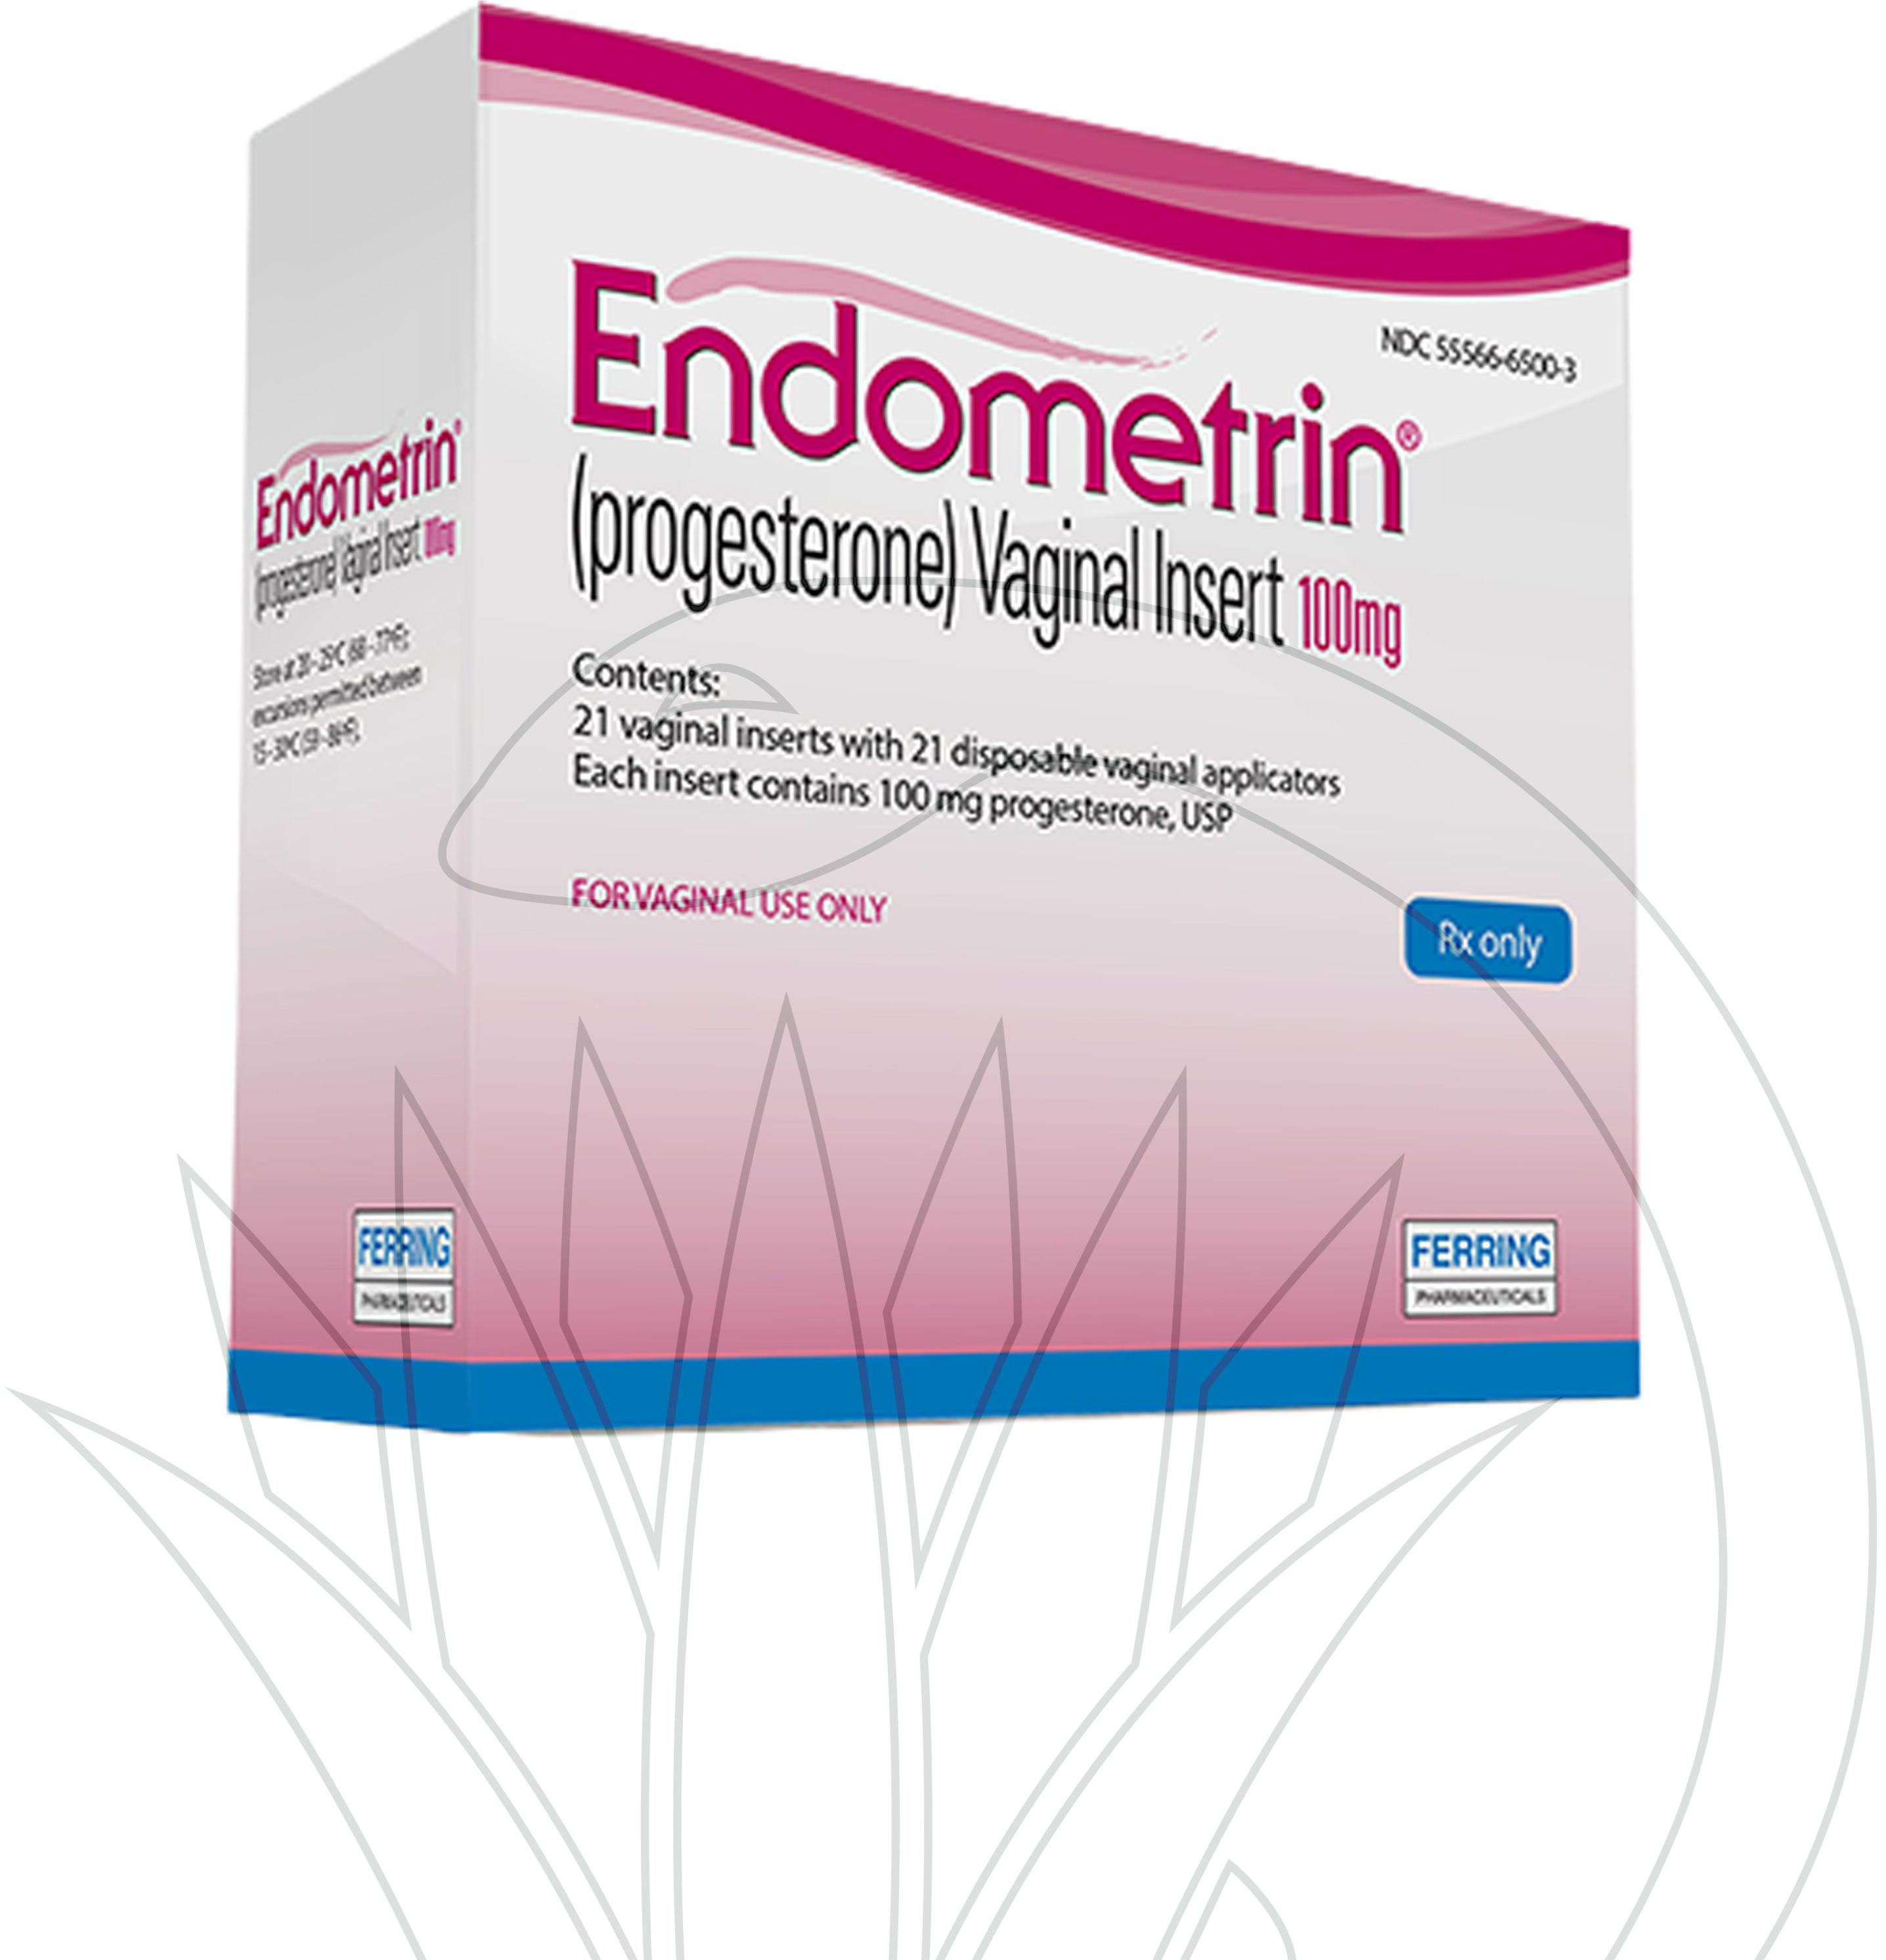 endometrin-100mg-21-vaginal-suppository-price-from-misr-online-in-egypt